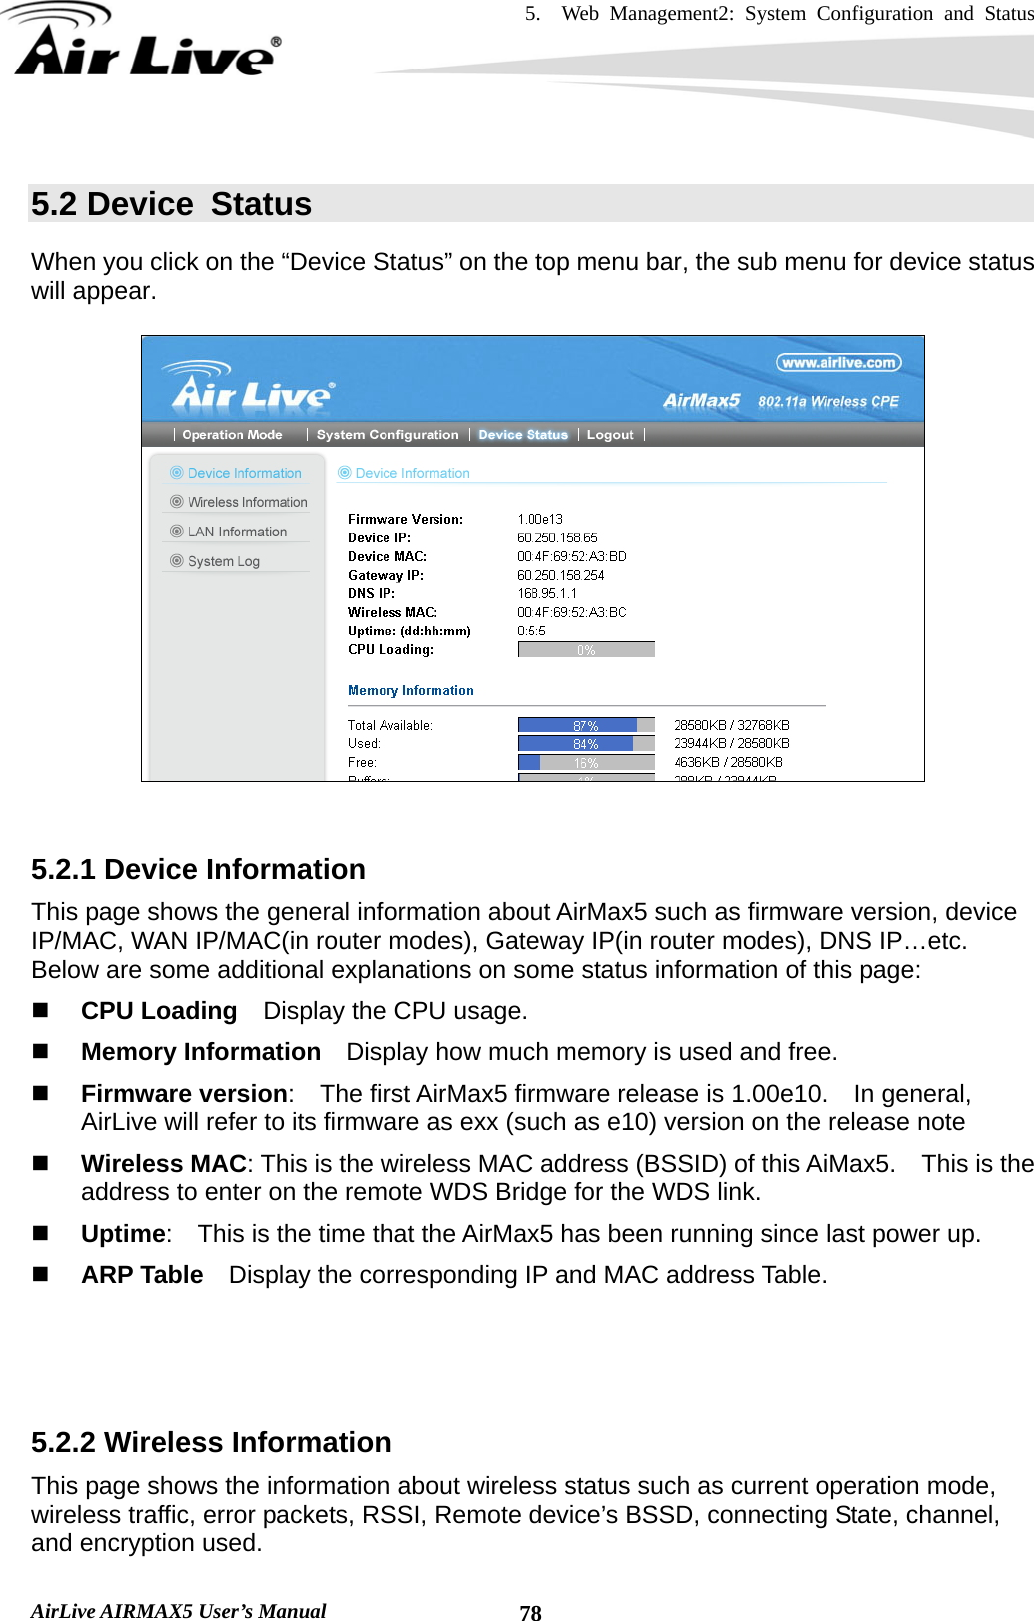 5.  Web Management2: System Configuration and Status    AirLive AIRMAX5 User’s Manual  785.2 Device  Status When you click on the “Device Status” on the top menu bar, the sub menu for device status will appear.       5.2.1 Device Information This page shows the general information about AirMax5 such as firmware version, device IP/MAC, WAN IP/MAC(in router modes), Gateway IP(in router modes), DNS IP…etc.   Below are some additional explanations on some status information of this page:  CPU Loading    Display the CPU usage.      Memory Information    Display how much memory is used and free.  Firmware version:  The first AirMax5 firmware release is 1.00e10.    In general, AirLive will refer to its firmware as exx (such as e10) version on the release note  Wireless MAC: This is the wireless MAC address (BSSID) of this AiMax5.    This is the address to enter on the remote WDS Bridge for the WDS link.  Uptime:    This is the time that the AirMax5 has been running since last power up.  ARP Table    Display the corresponding IP and MAC address Table.    5.2.2 Wireless Information This page shows the information about wireless status such as current operation mode, wireless traffic, error packets, RSSI, Remote device’s BSSD, connecting State, channel, and encryption used.     